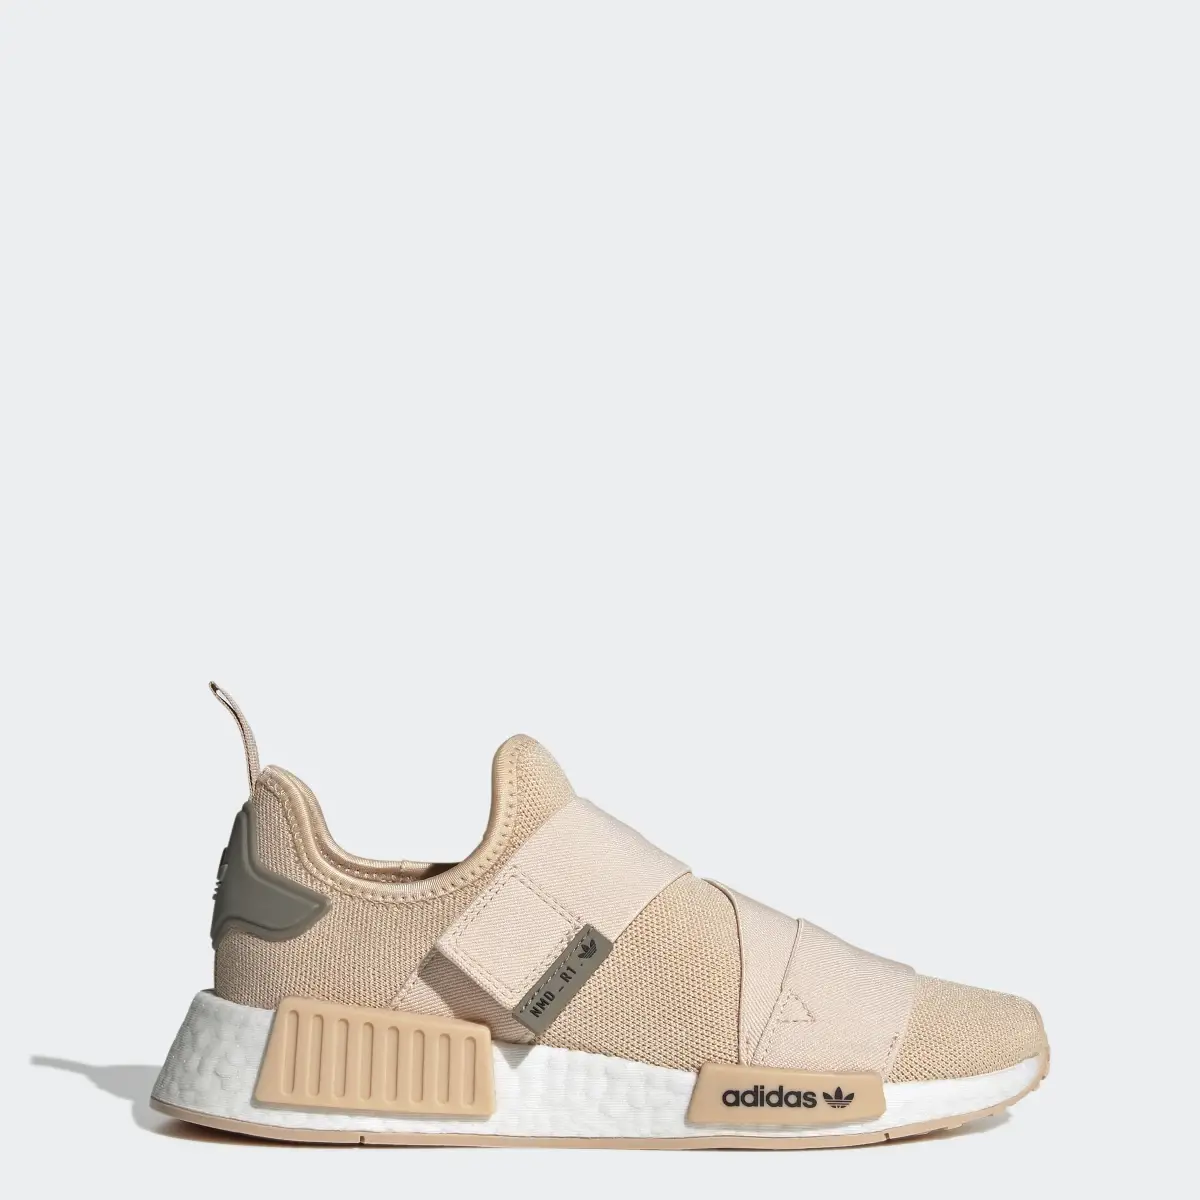 Adidas NMD_R1 Strap Shoes. 1